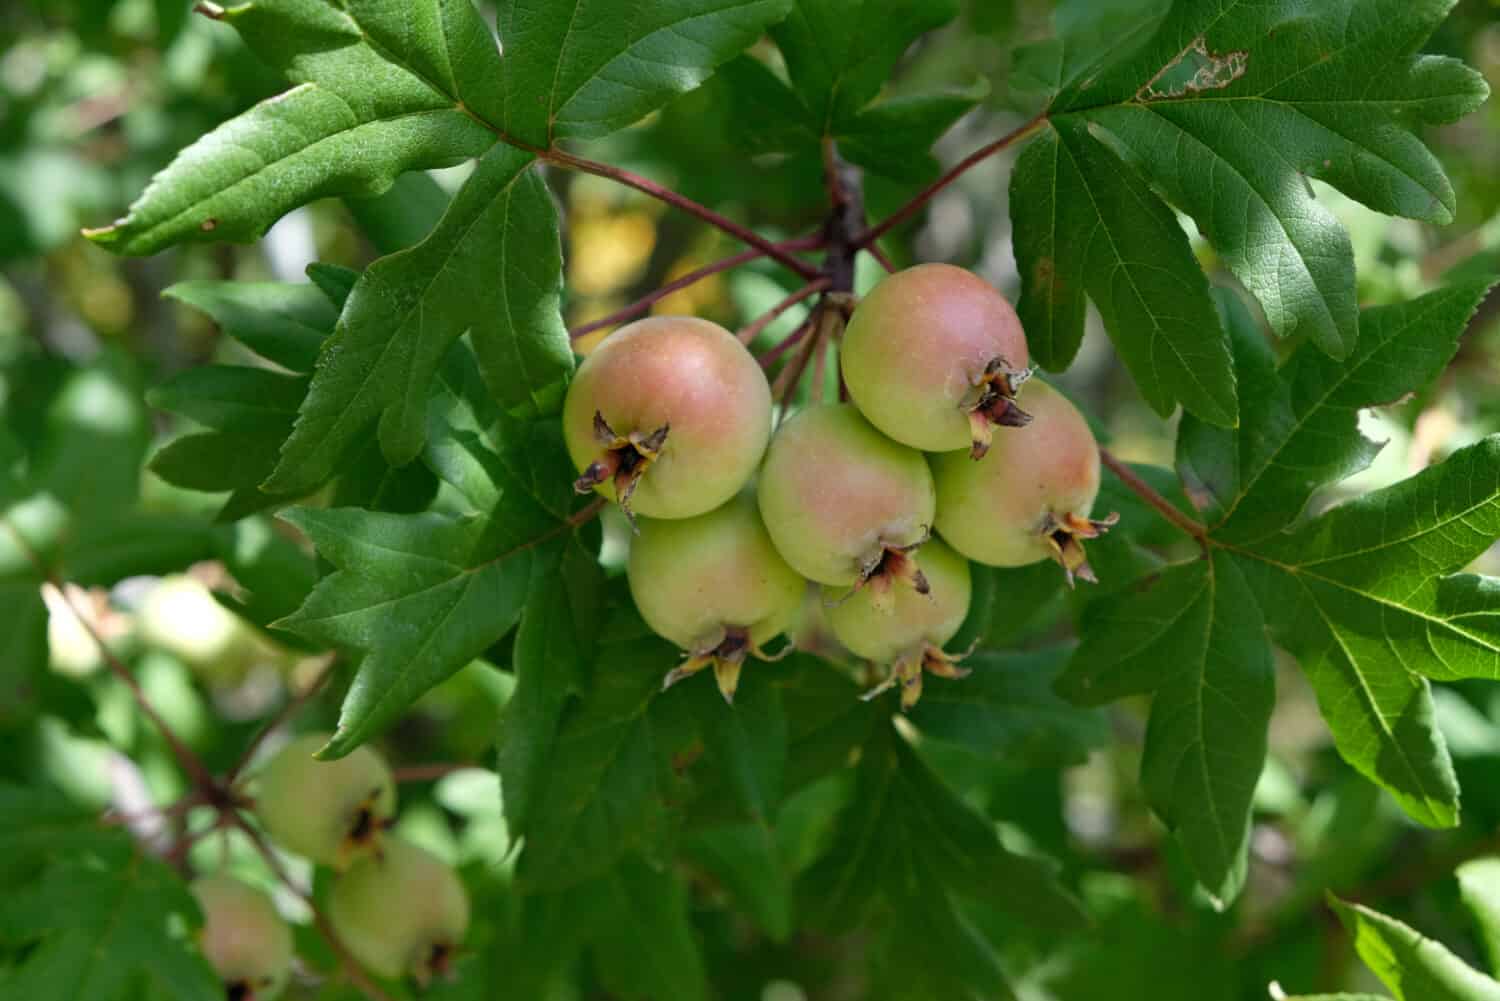 malus trilobata, commonly known as Lebanese wild apple, erect crab apple or three-lobed apple tree